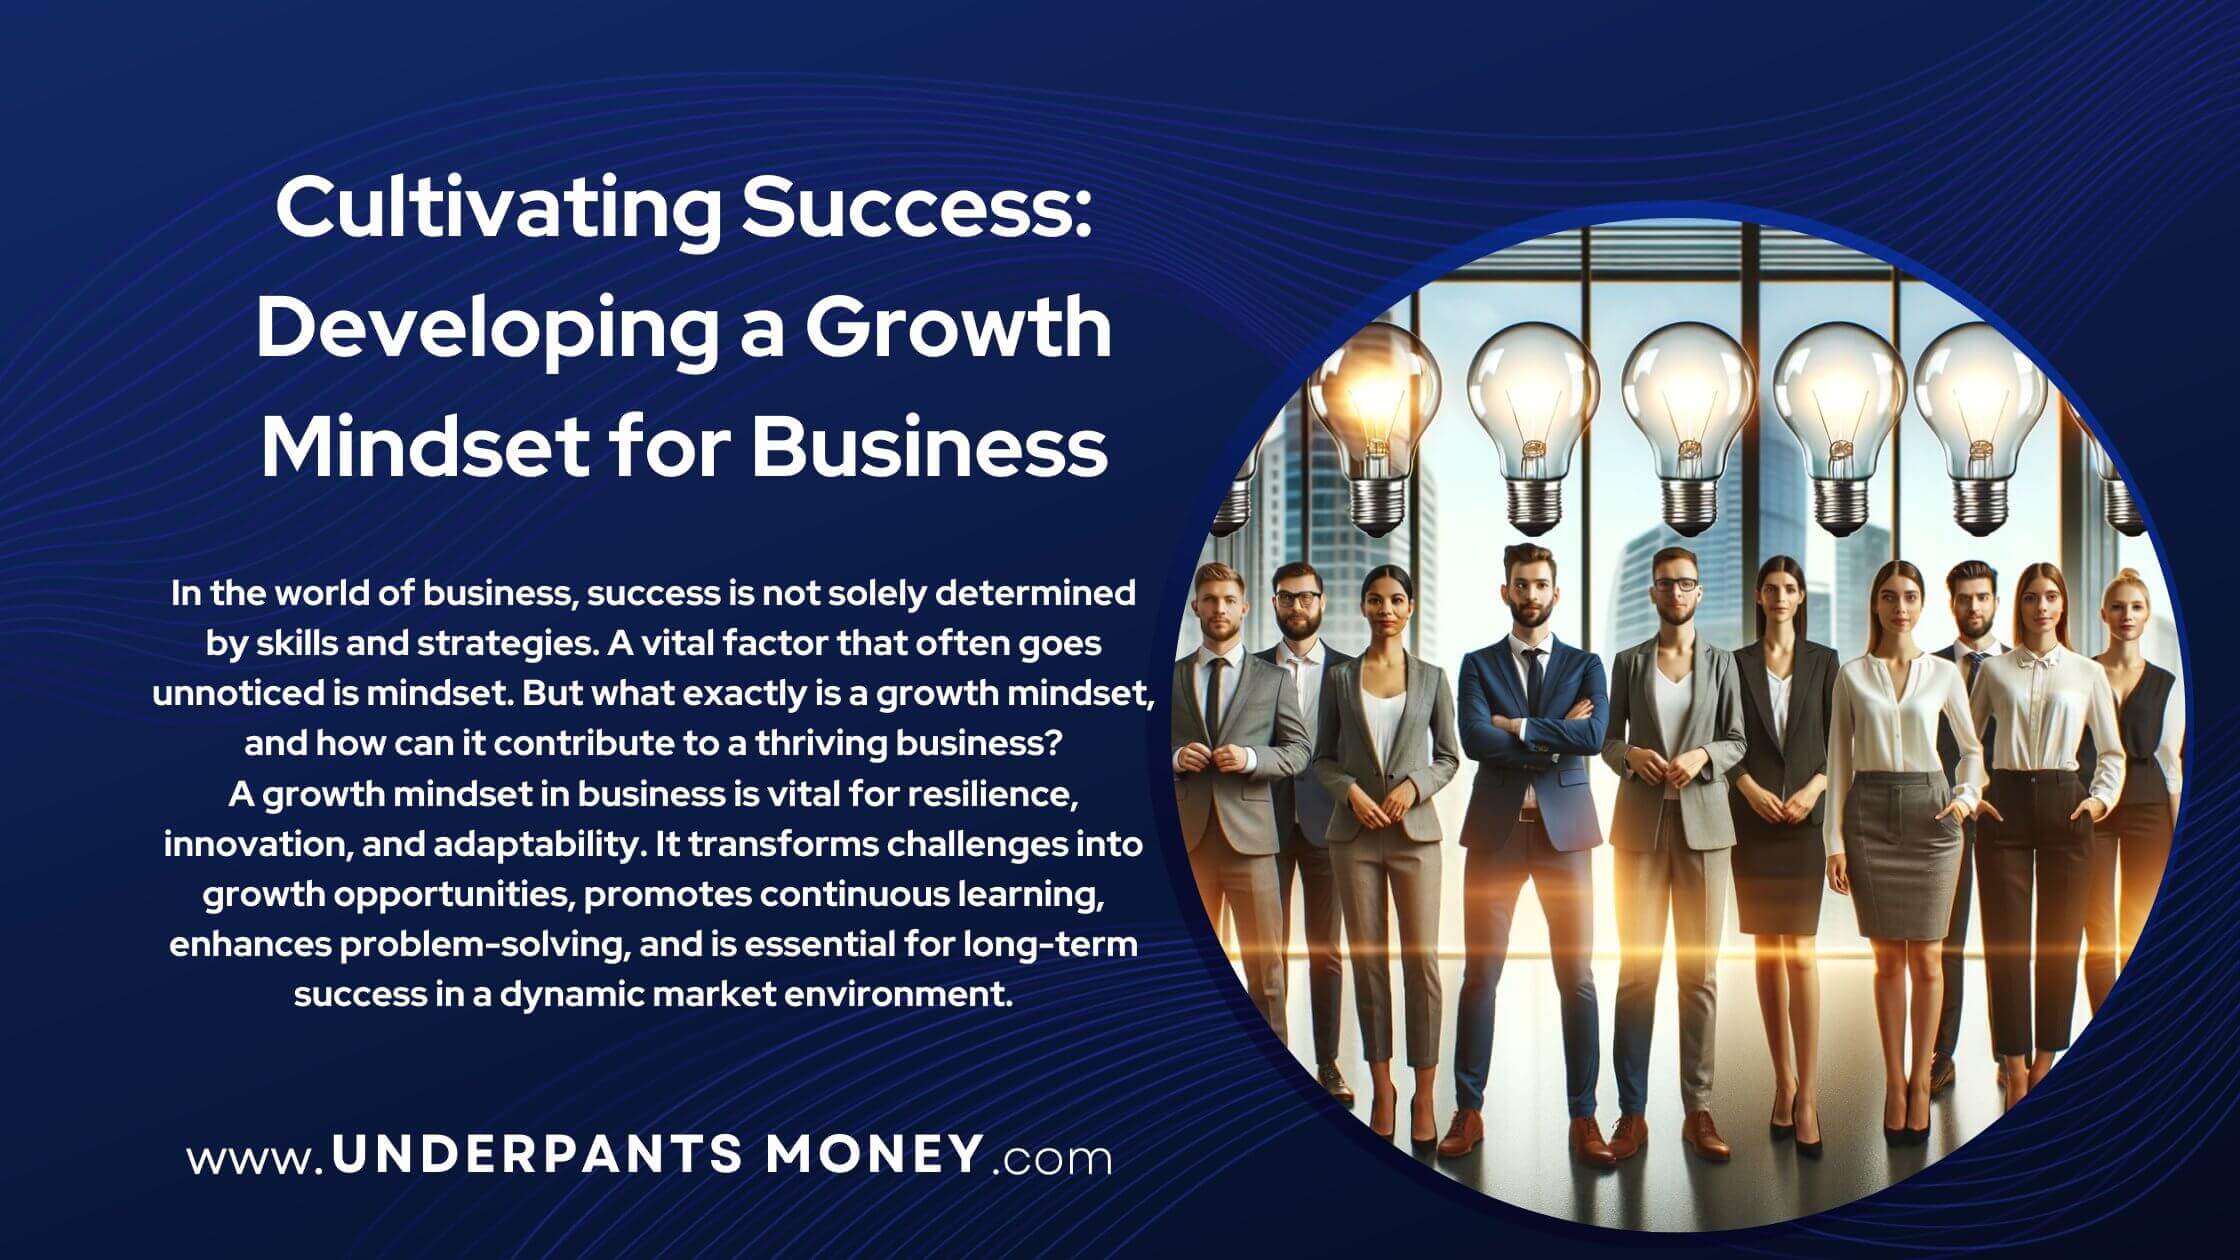 developing a growth mindset for business title and description on blue with image of businesspeople standing in a row with lightbulbs above heads